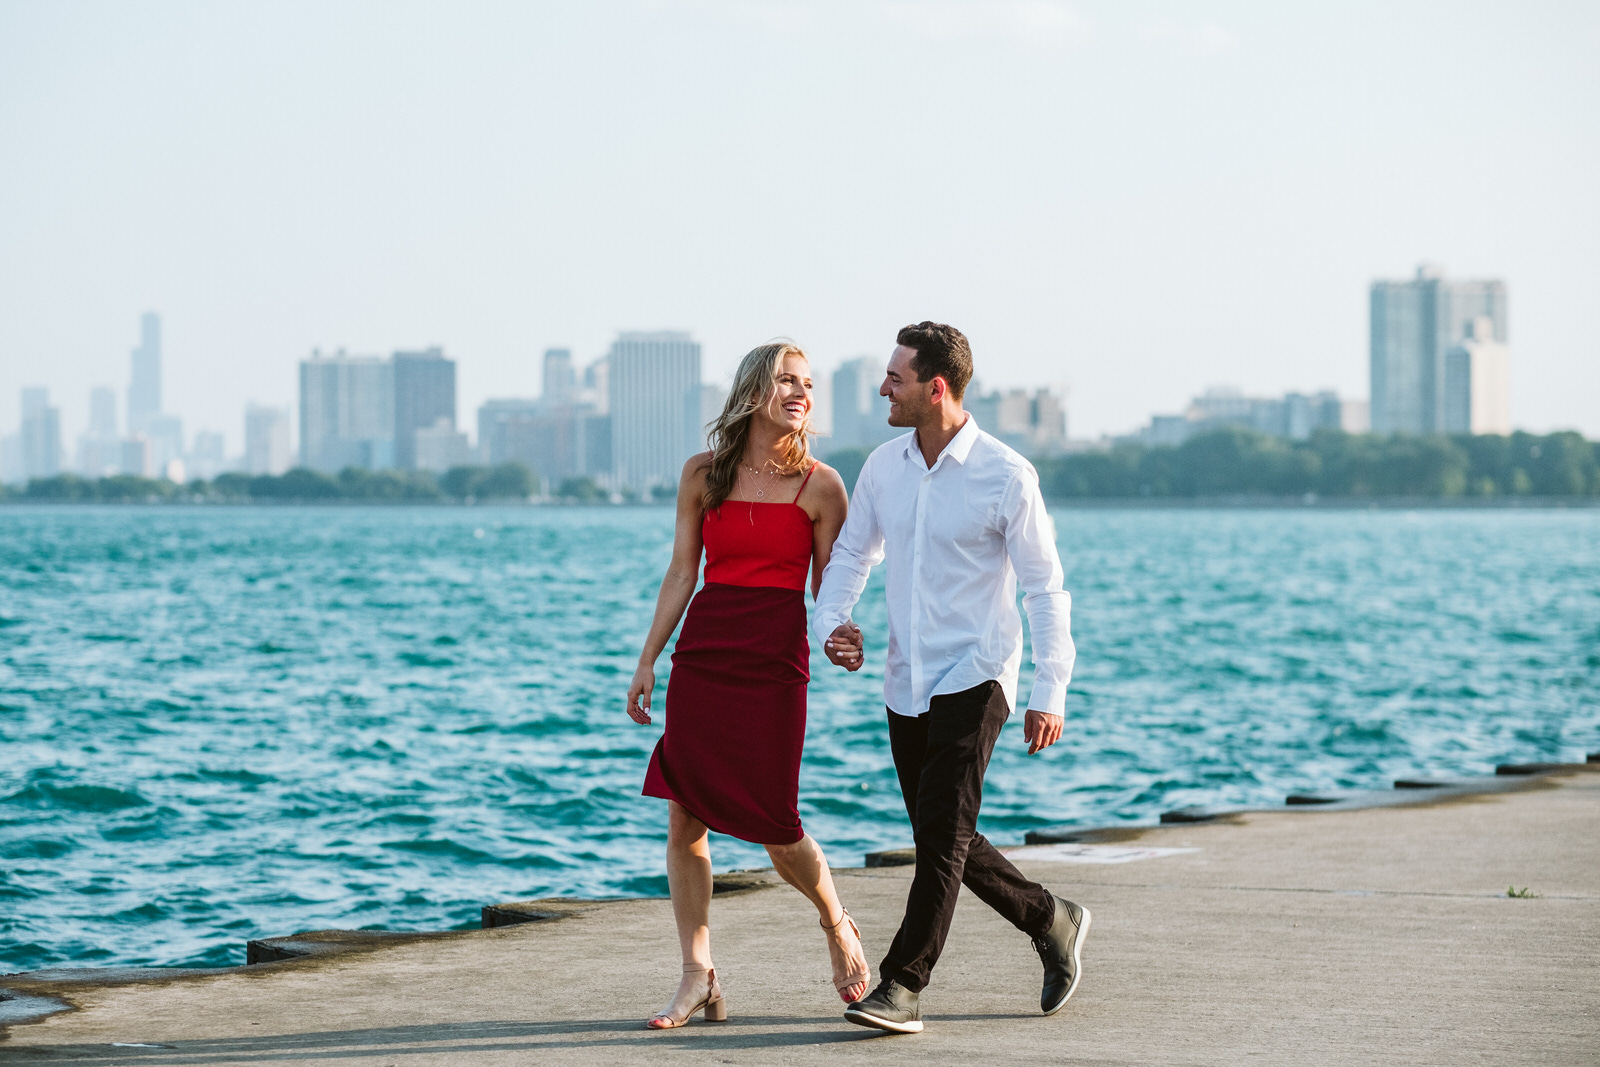 Chicago engagement session locations including the skyline at North Avenue Beach. Photos taken by luxury wedding photographer Michael & Kristin Photo and Video.